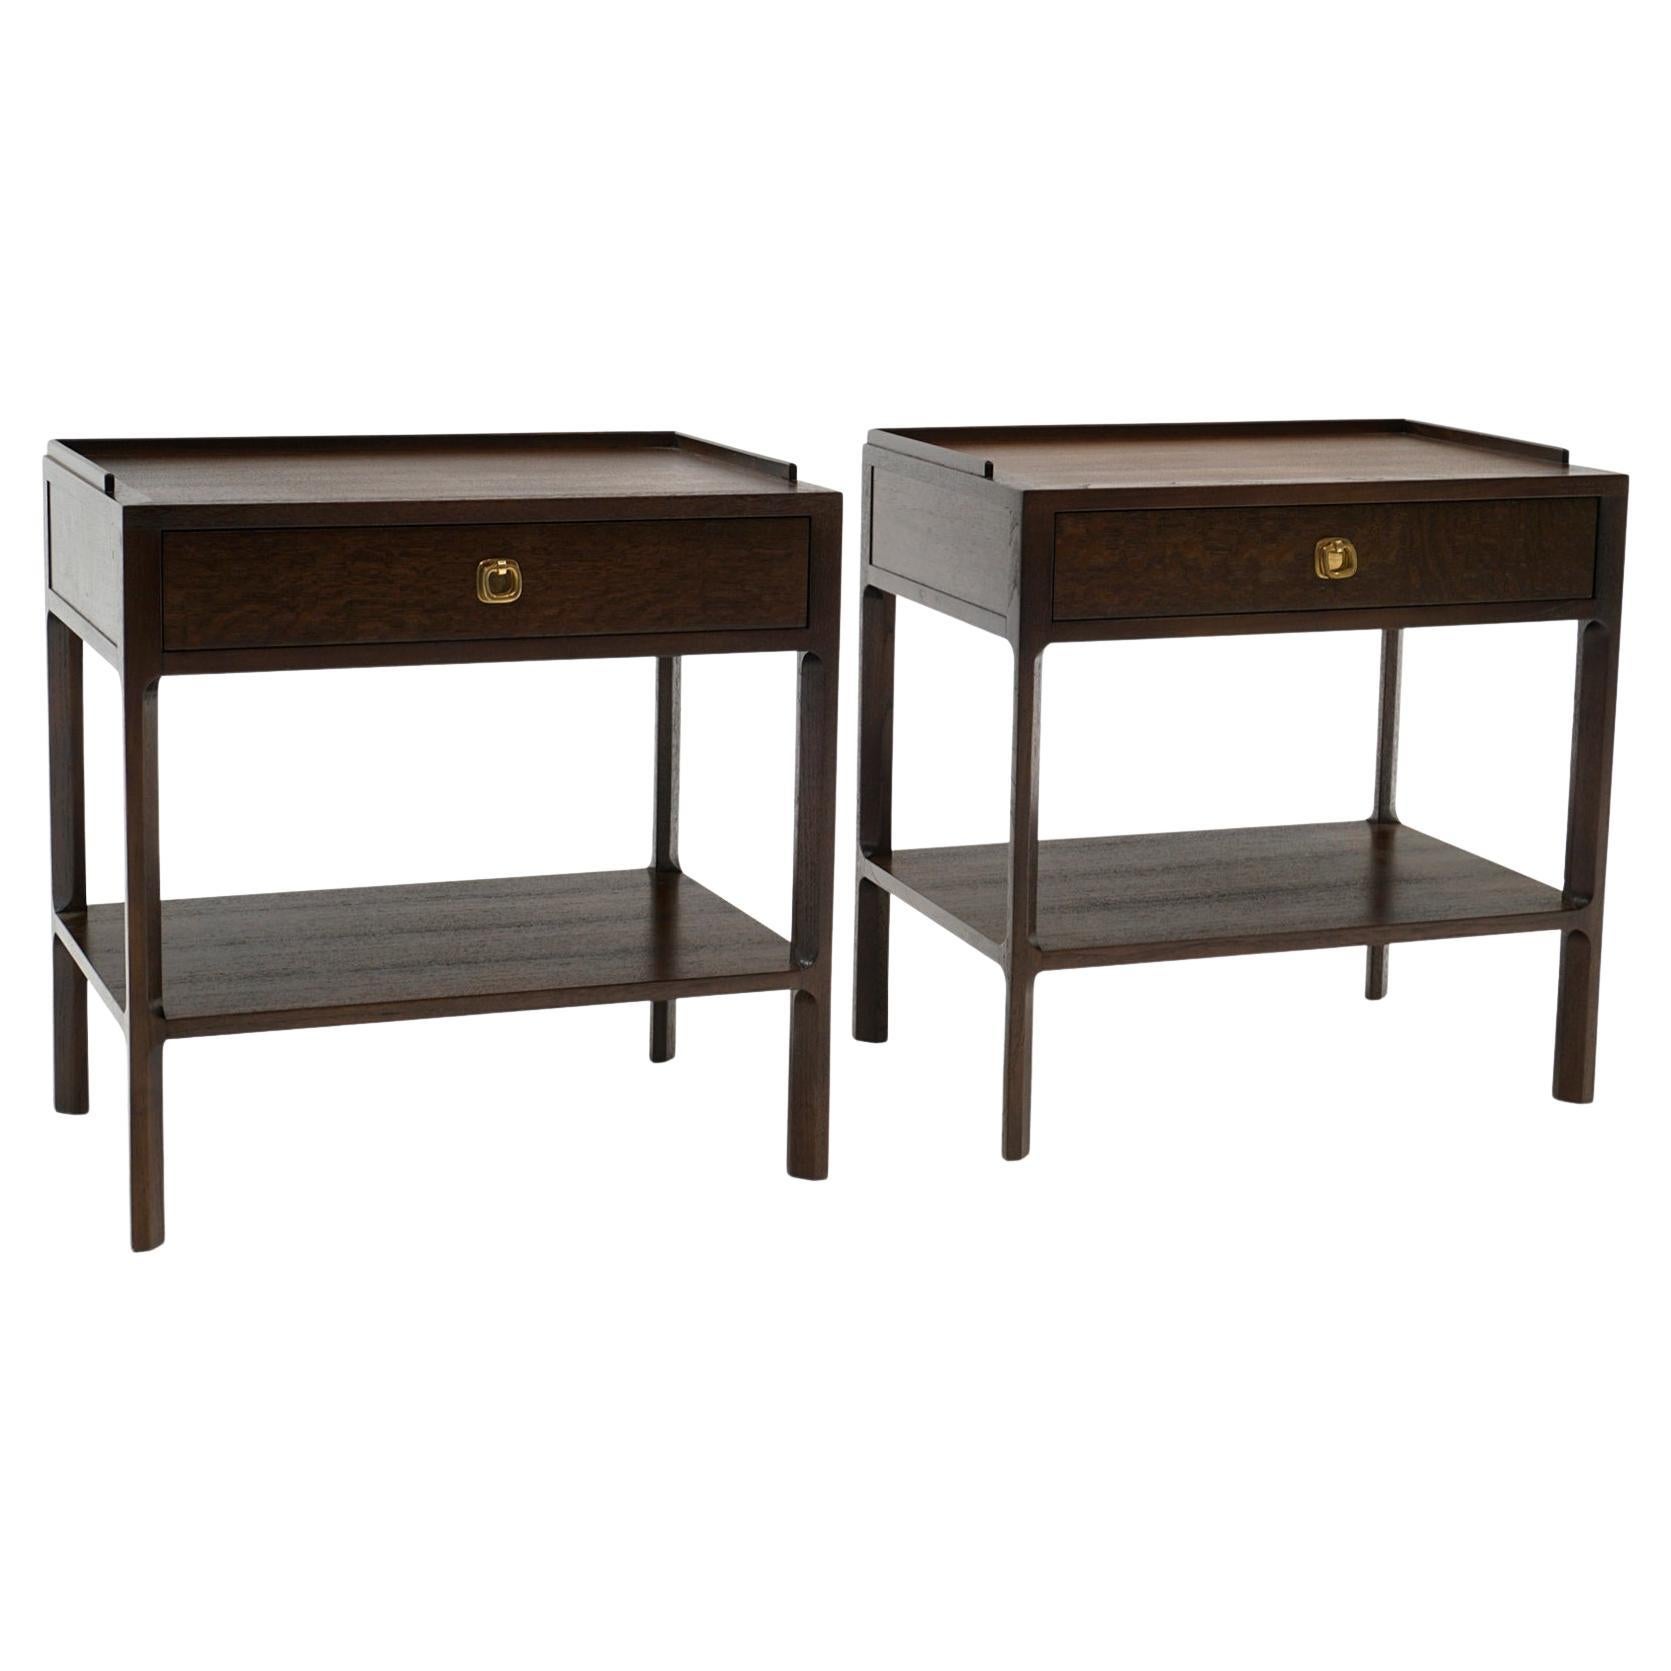 Pair NIghtstands /End Tables by Edward Wormley for Dunbar. SolidTeak,English Oak